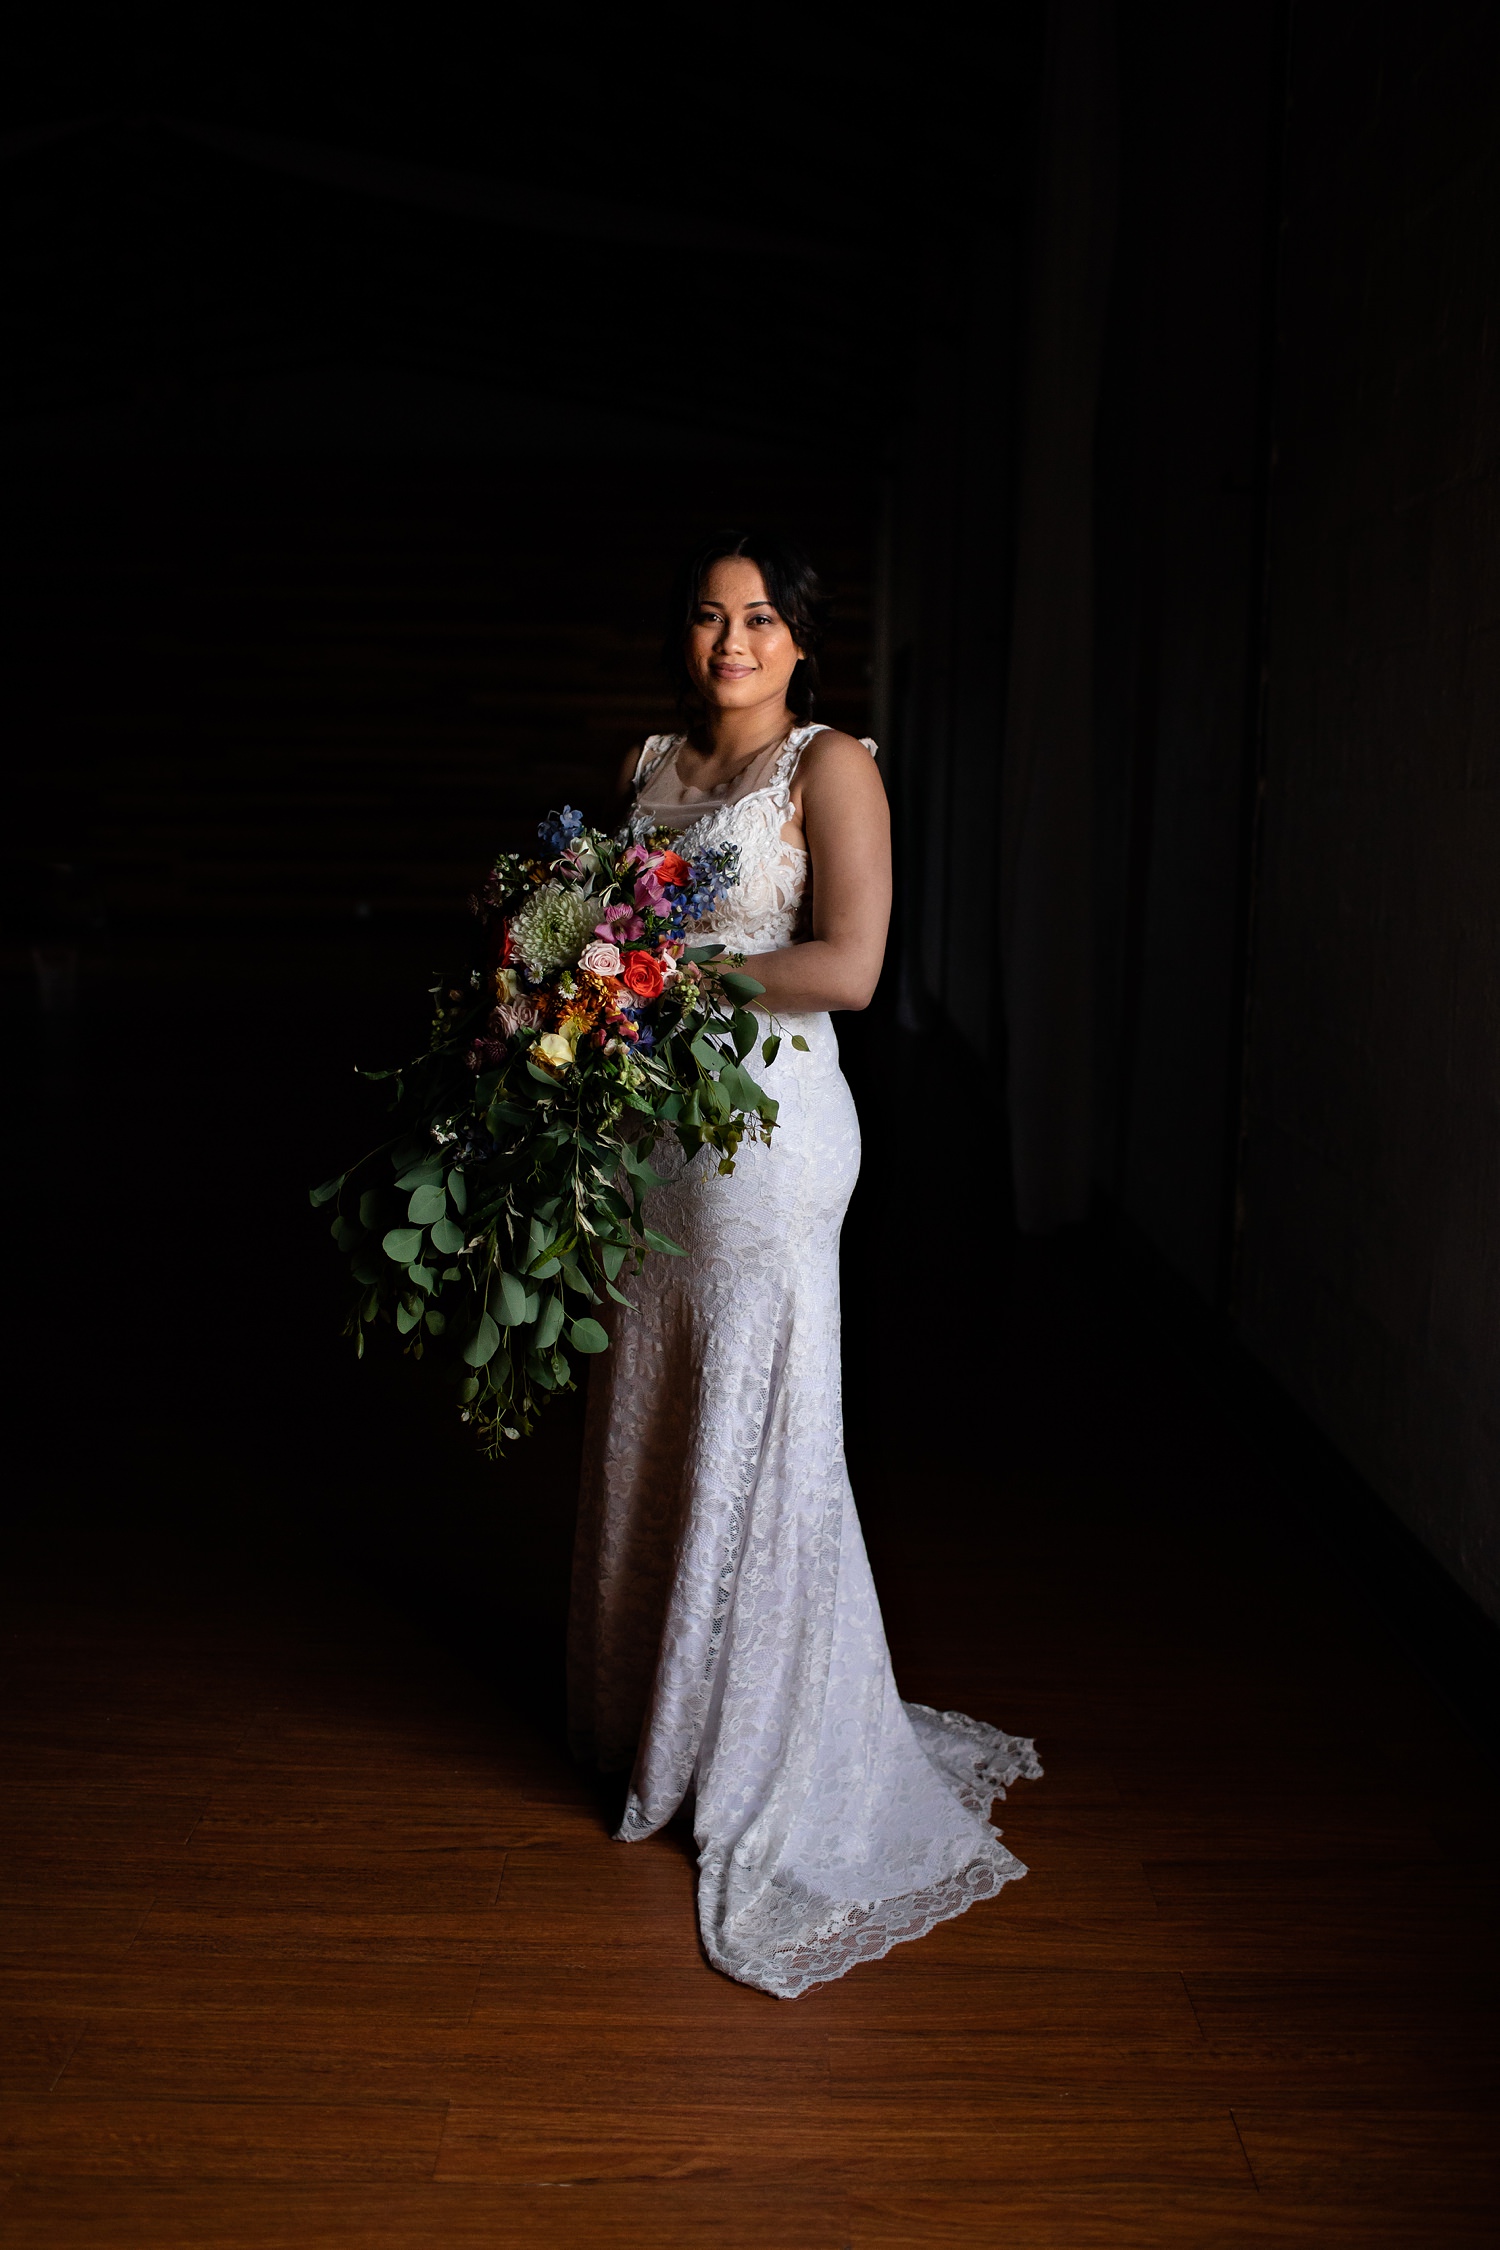 Classic portrait of a bride standing in a patch of light with her cascading bouquet by Niki M, Johannesburg Wedding Photographer